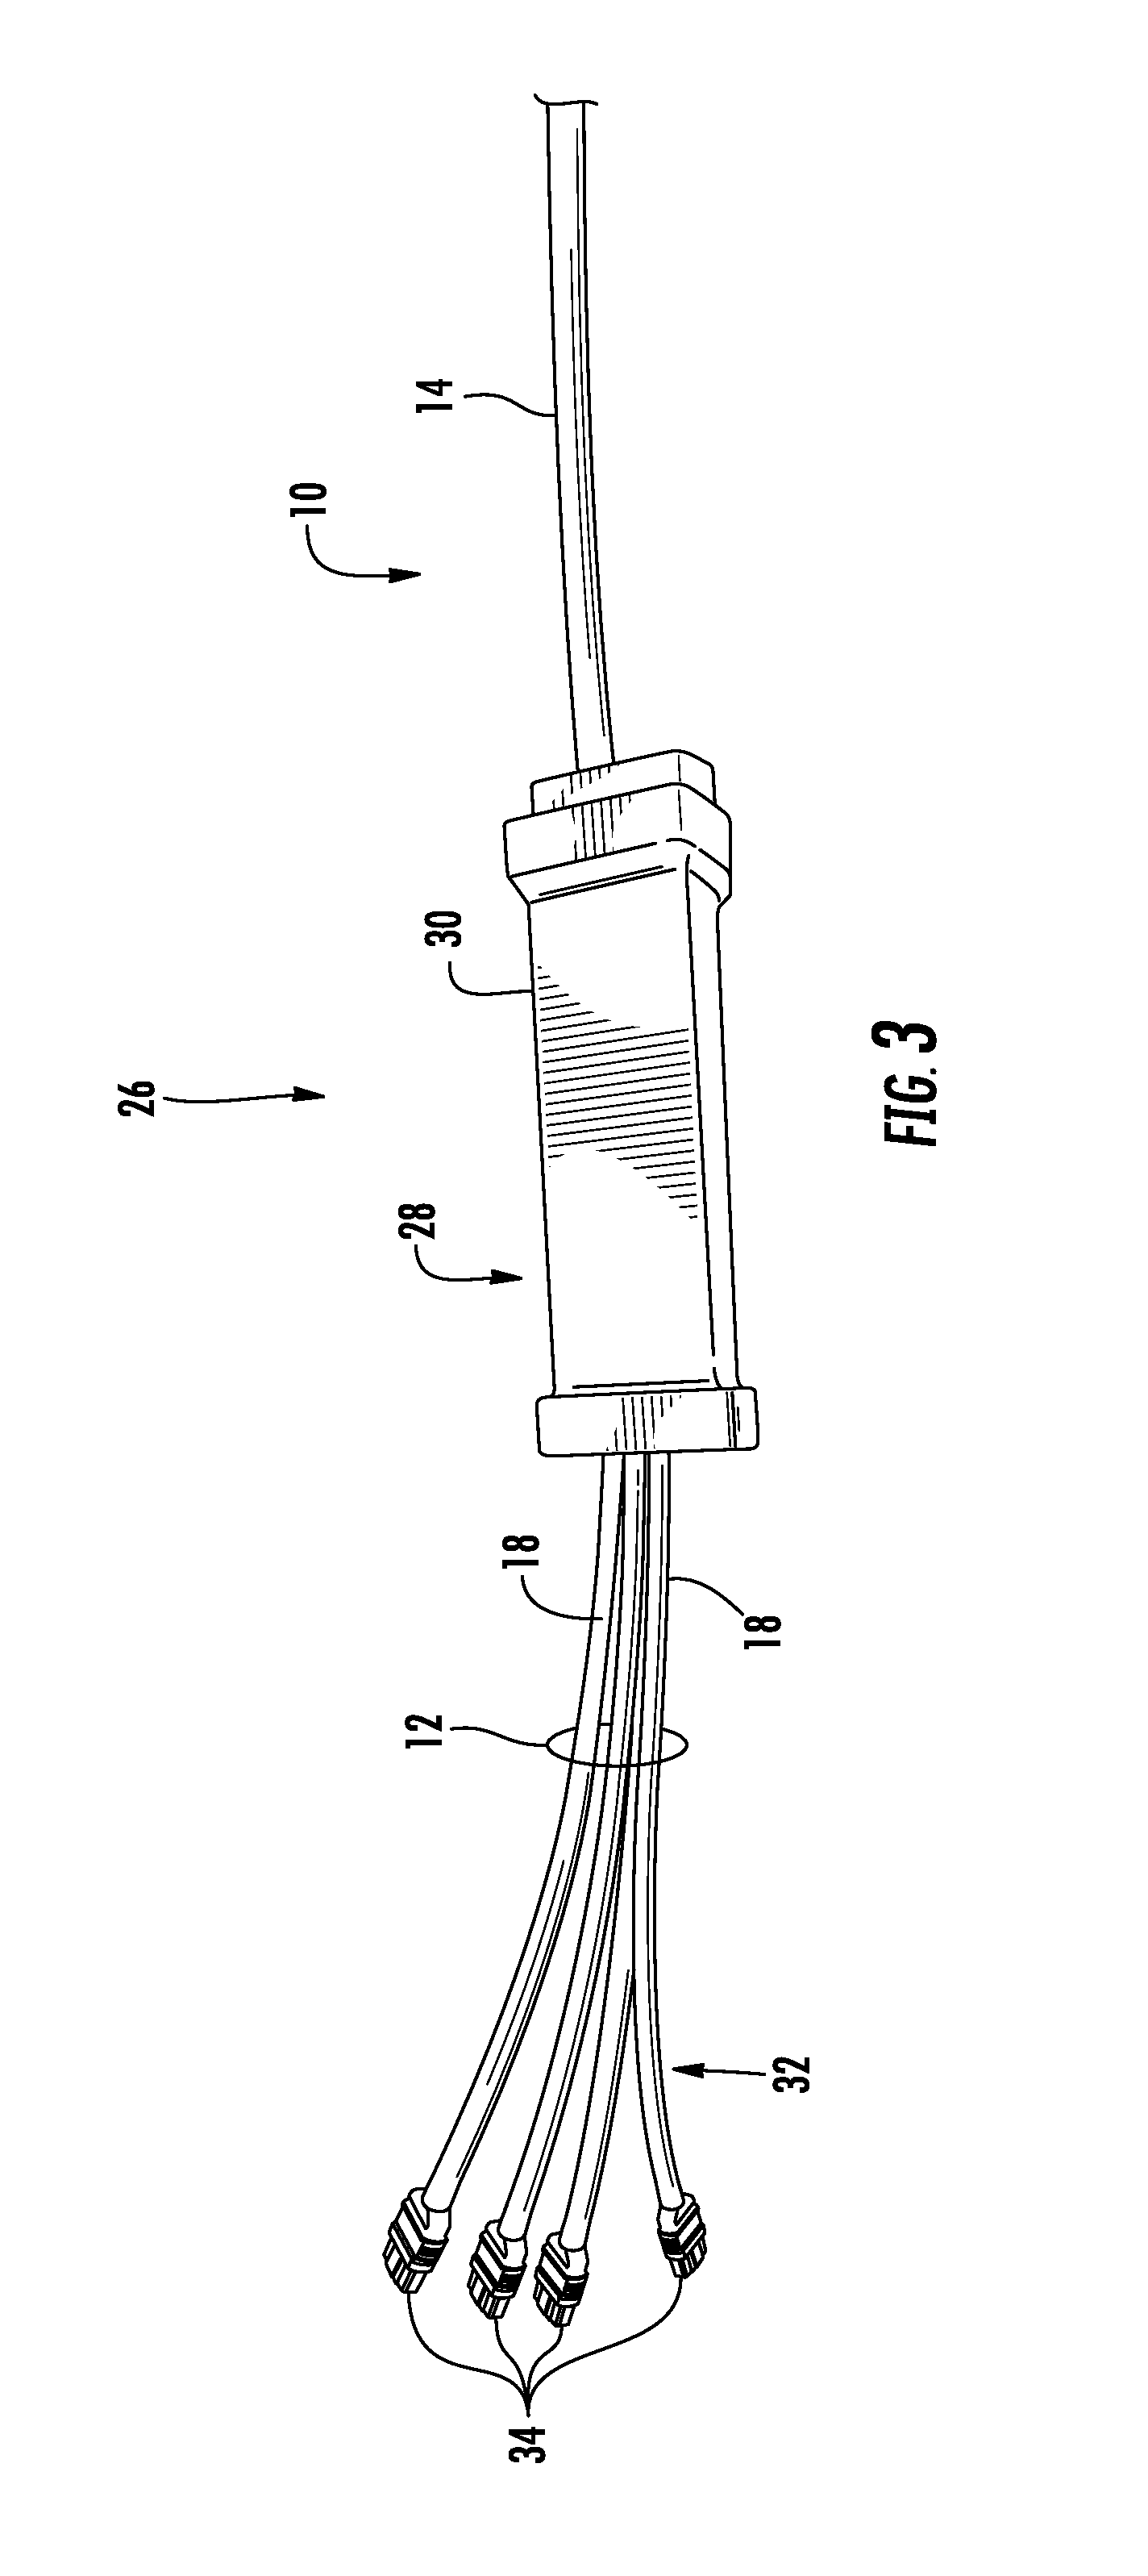 Multi-fiber, fiber optic cable assemblies providing constrained optical fibers within an optical fiber sub-unit, and related fiber optic components, cables, and methods